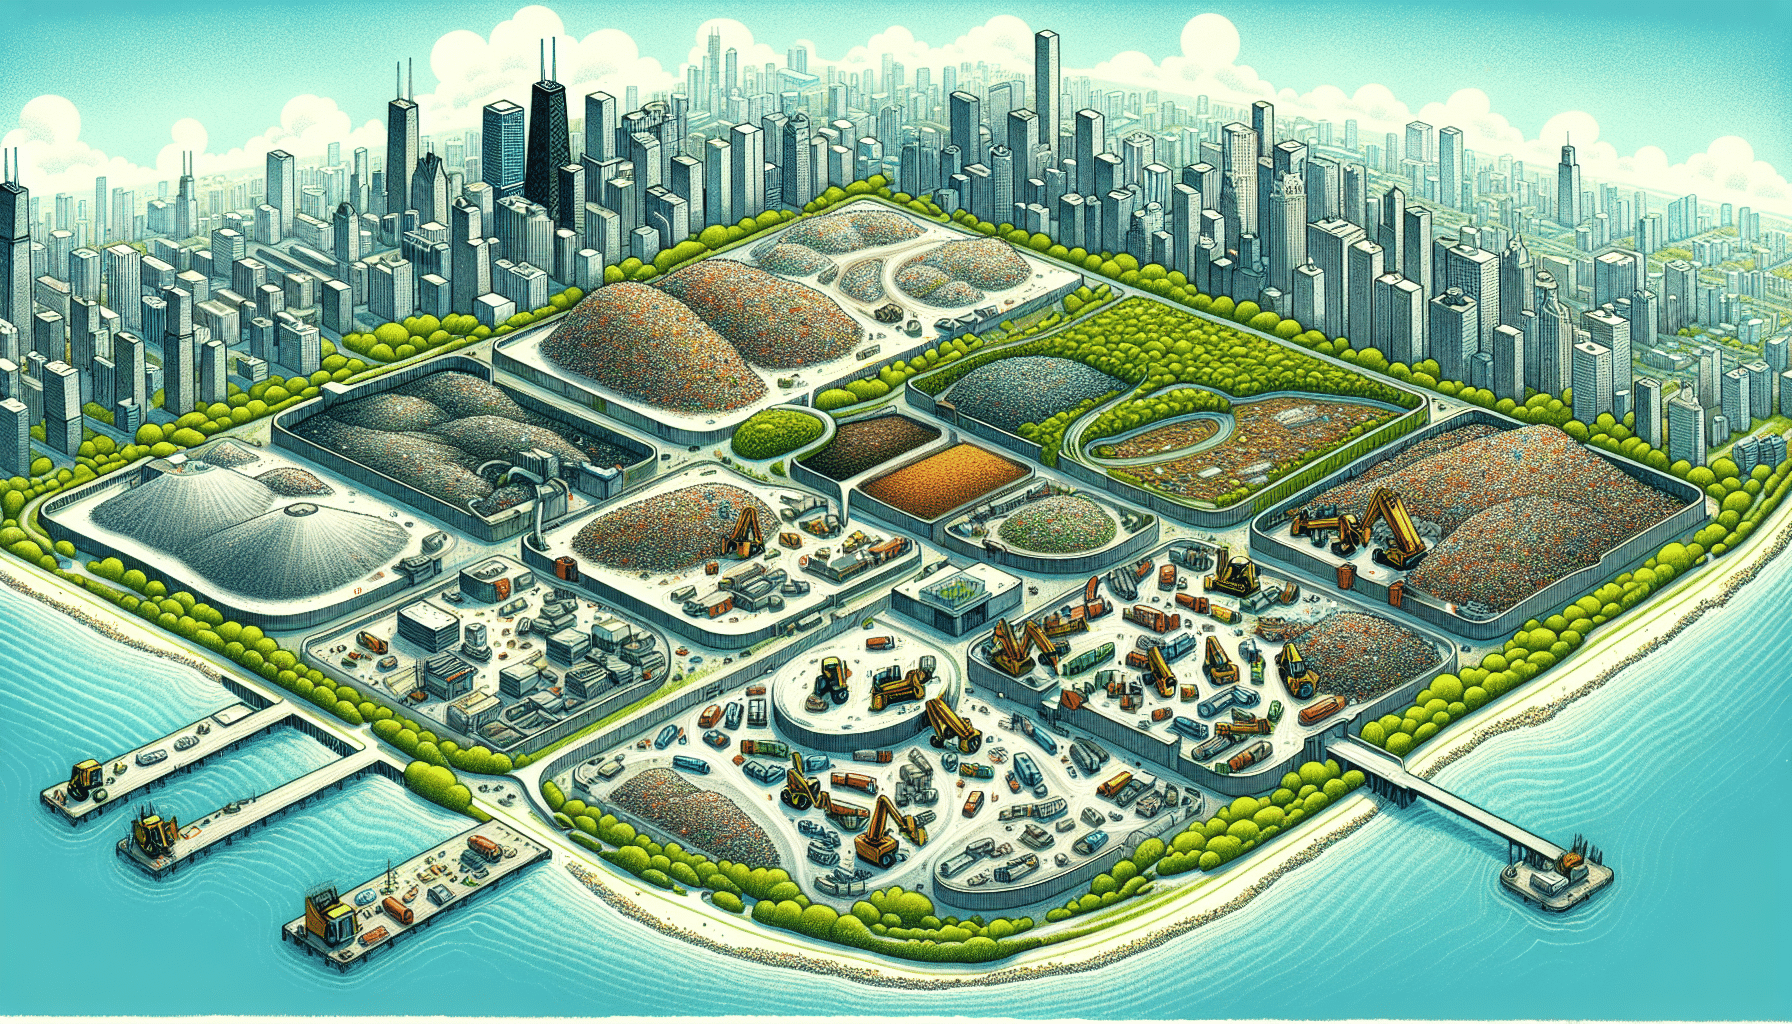 Illustration of active landfills in Chicago area